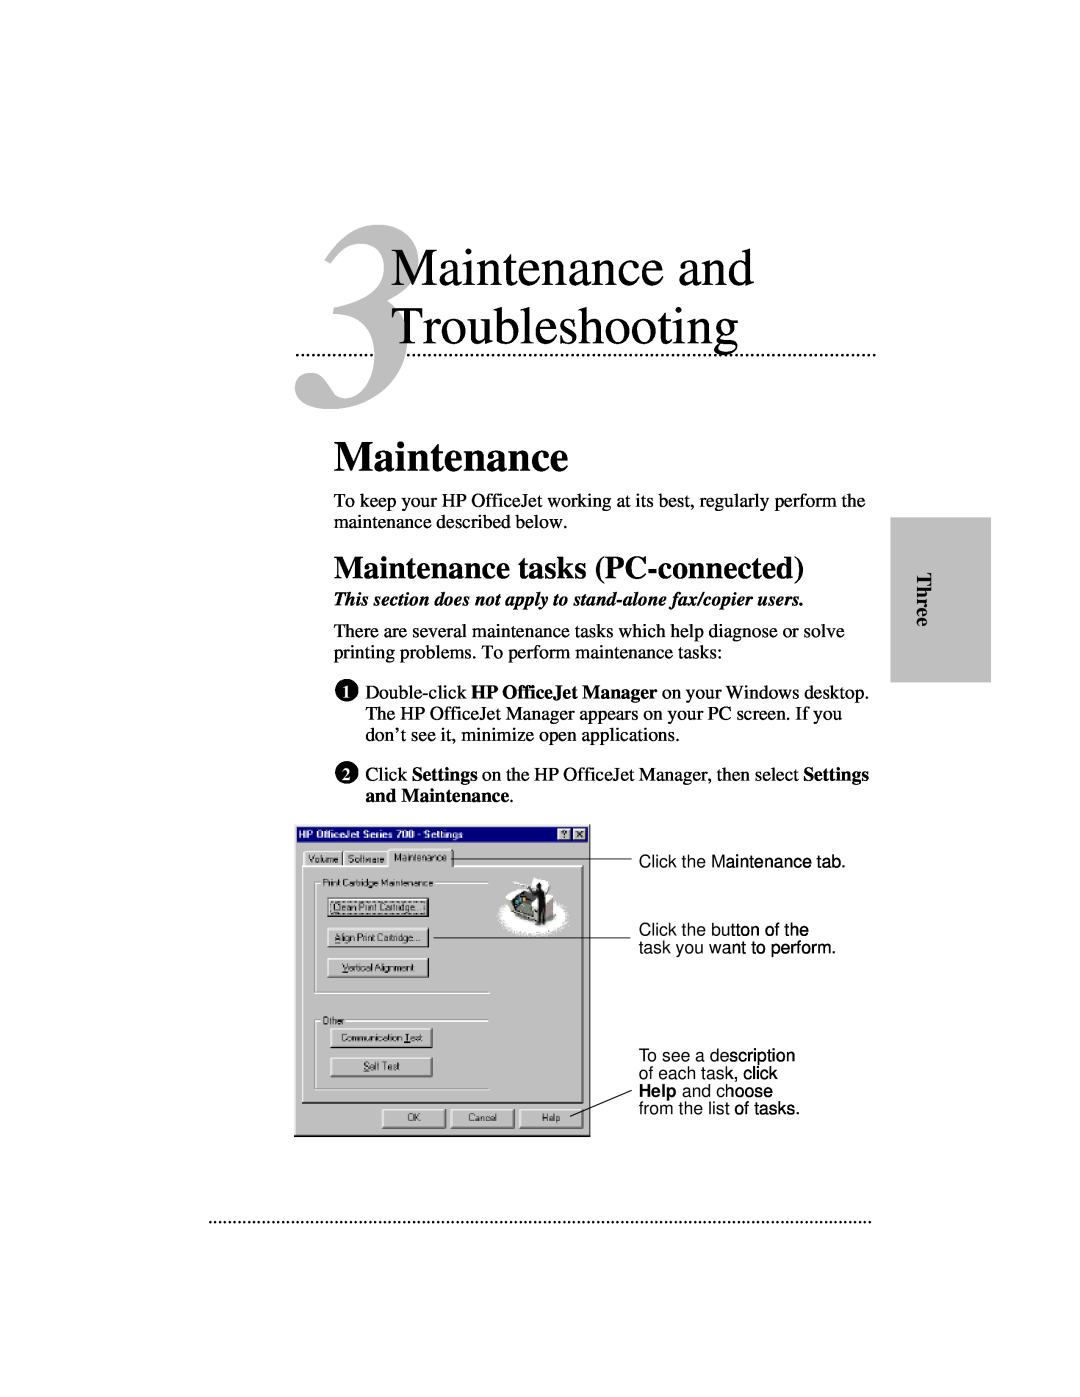 HP 700 manual Maintenance tasks PC-connected, Three, This section does not apply to stand-alone fax/copier users 